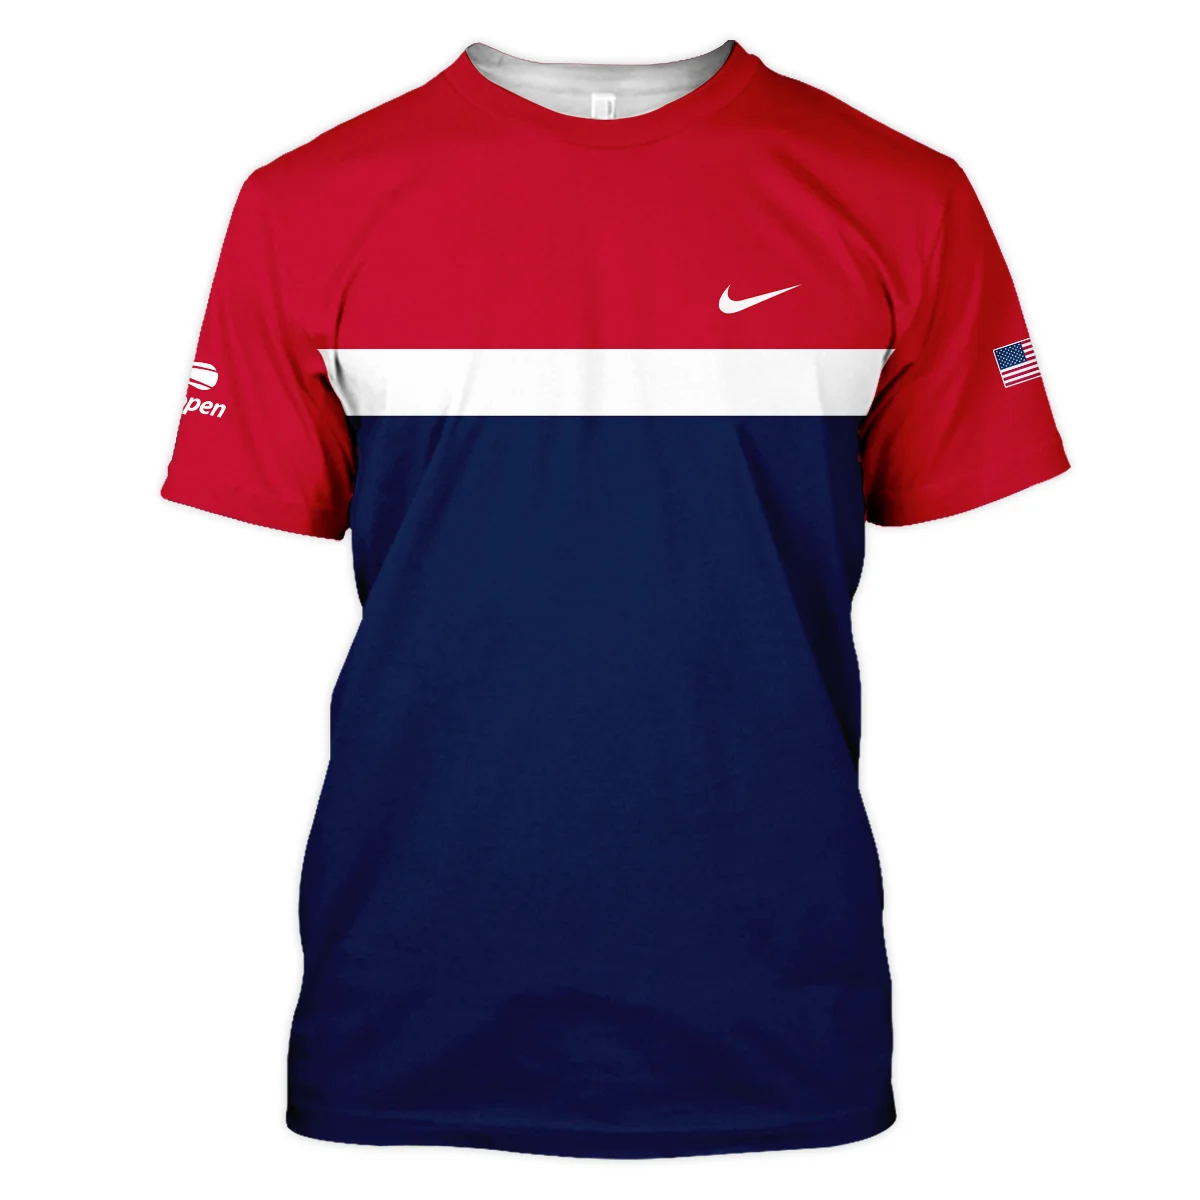 Nike Blue Red White Background US Open Tennis Champions Hoodie Shirt Style Classic Hoodie Shirt